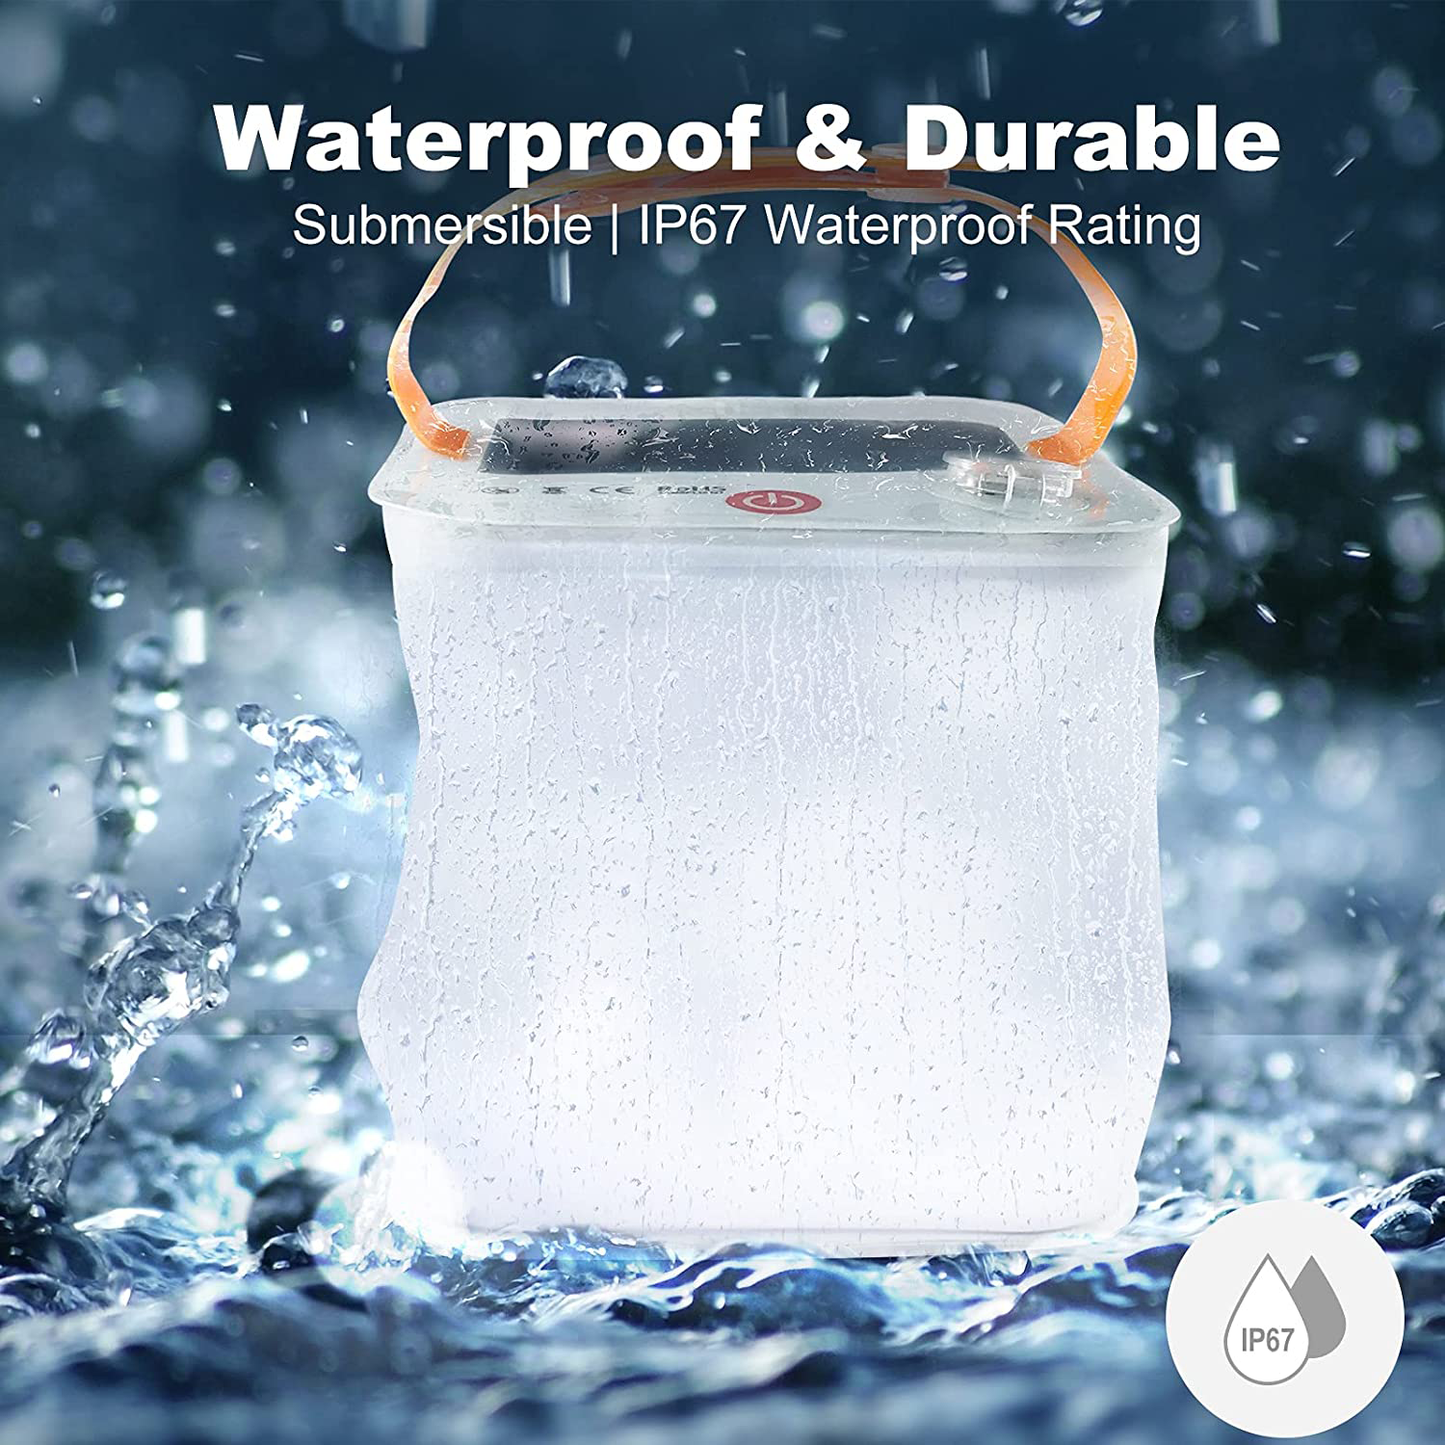 Inflatable Solar portable lantern is waterproof and durable.